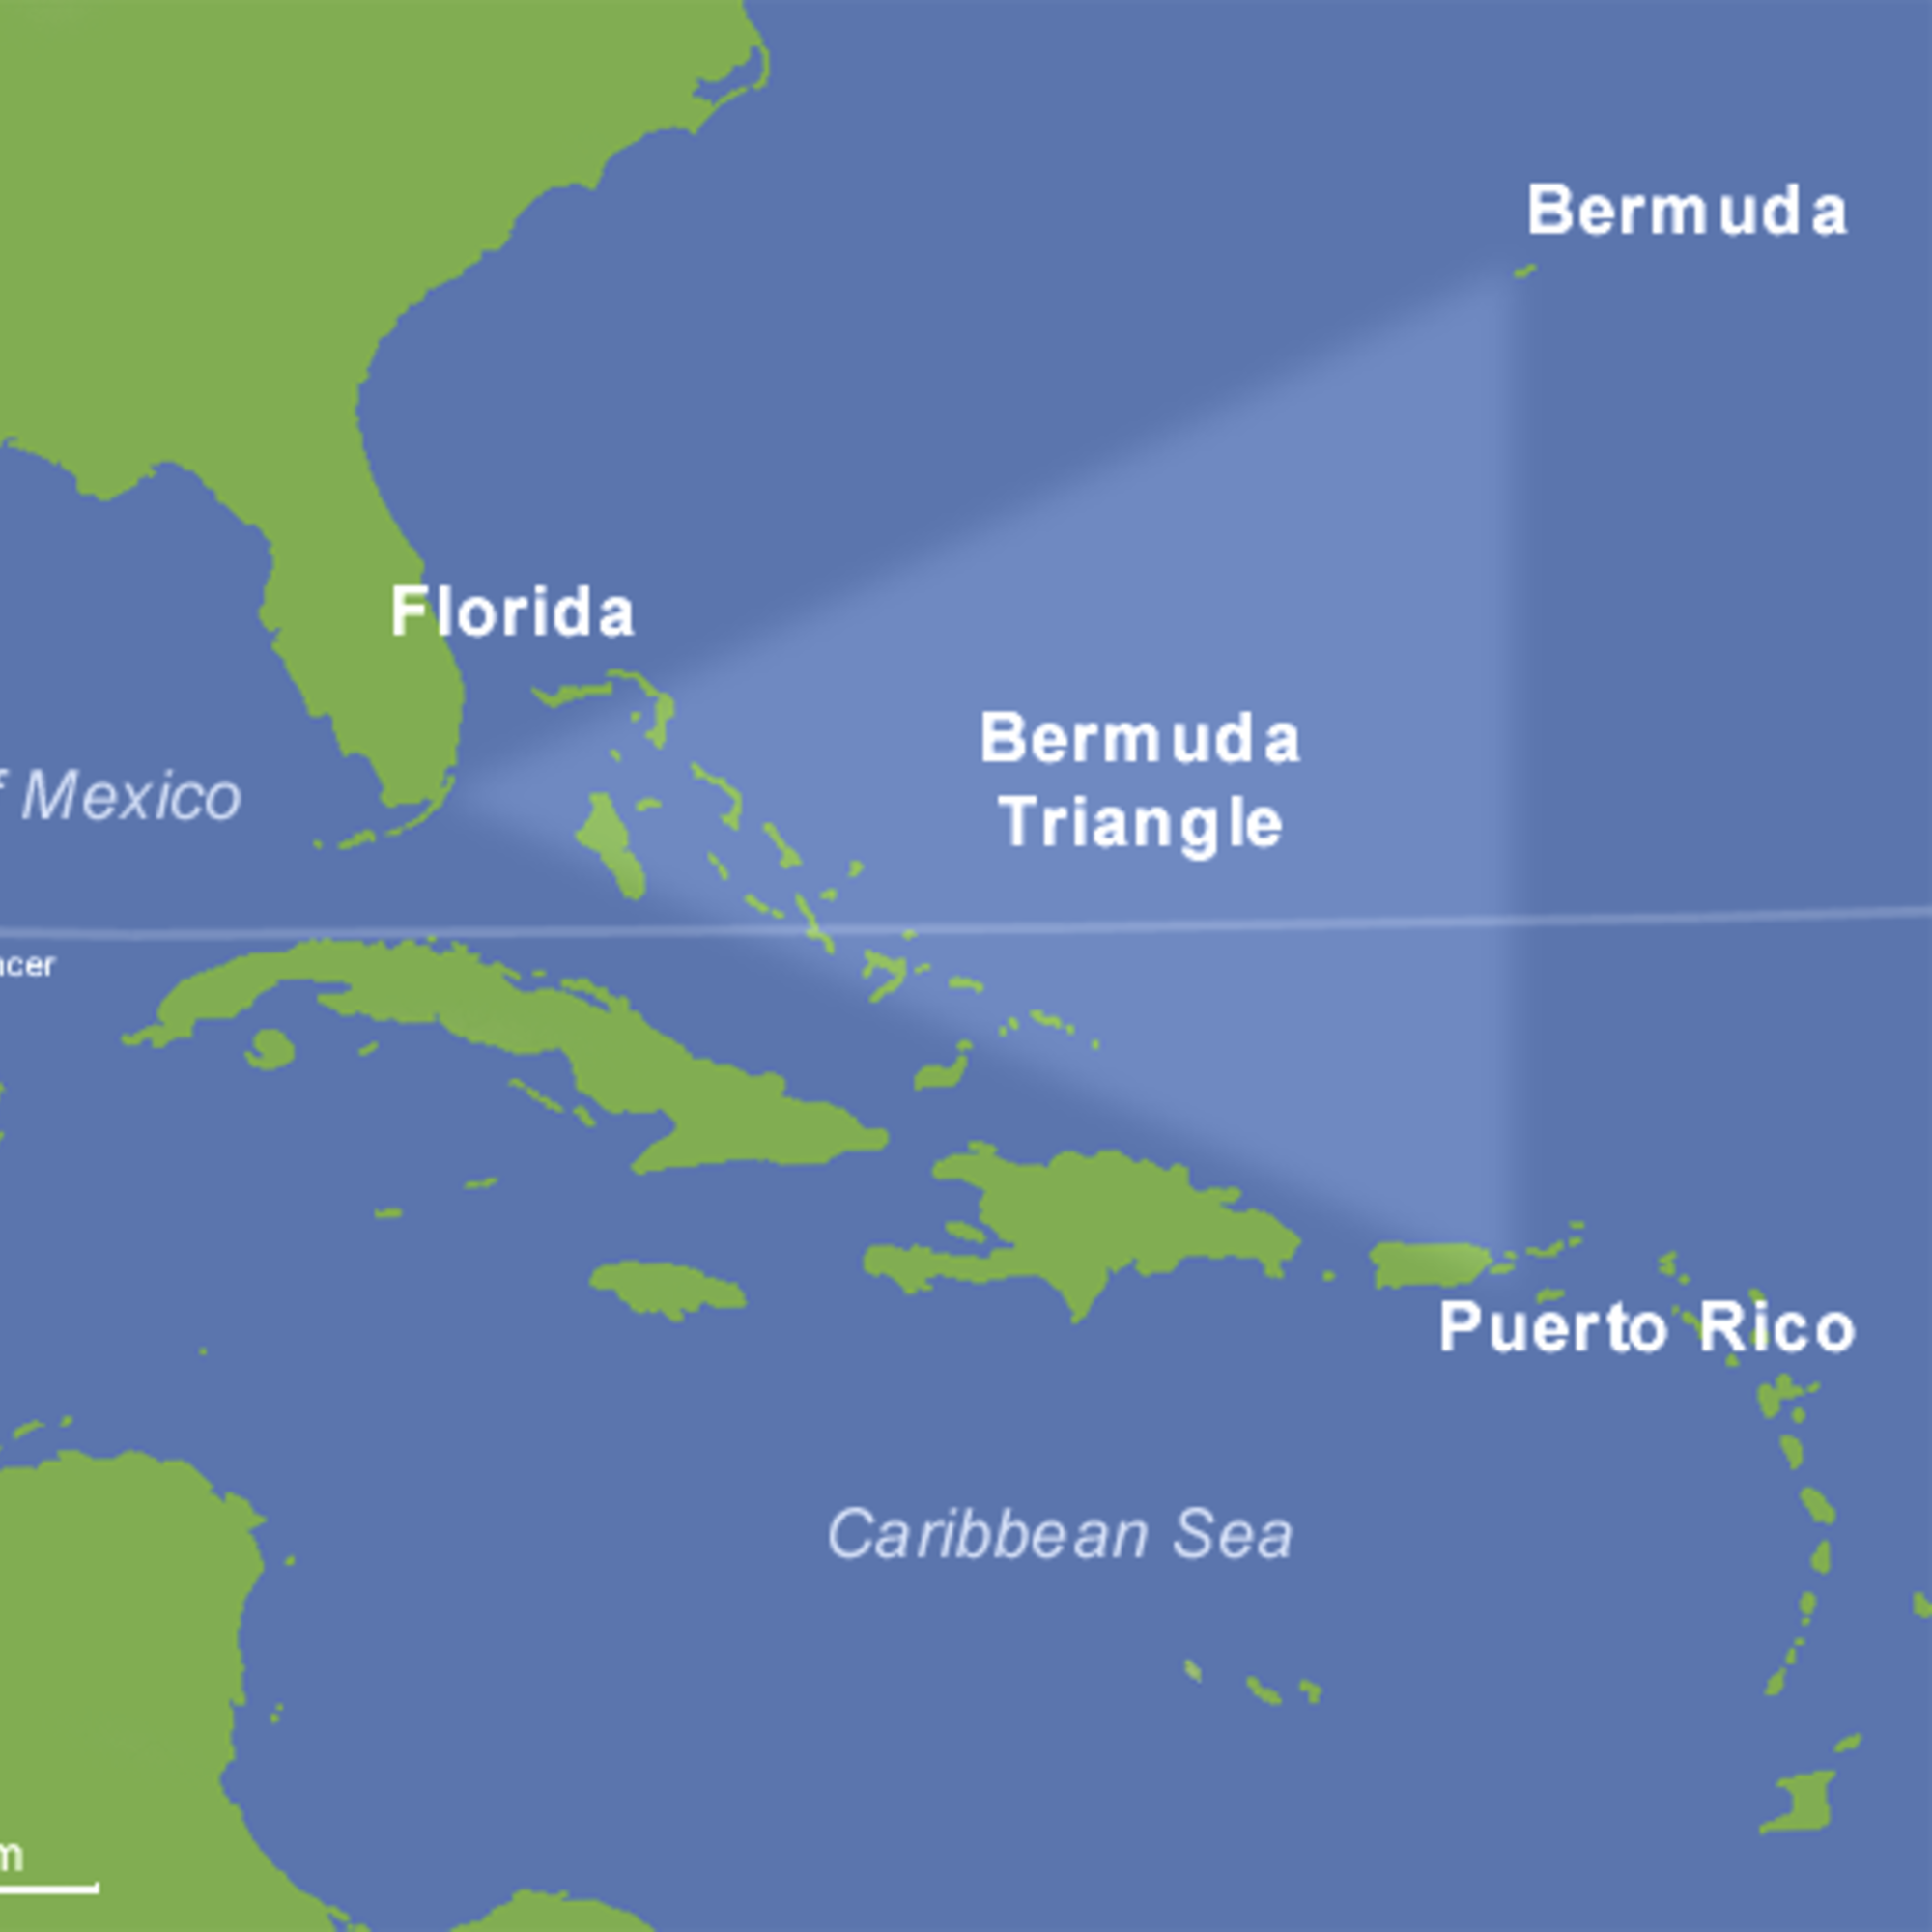 <p>While some writers have set the vertices of the triangle in Miami, San Juan (Puerto Rico) and Bermuda, others have given different boundaries and vertices, even stretching it as far as the Irish coast. Consequently, the recount of which accidents occurred inside the triangle depends on which writer reported them.</p> <p>Image: By Bermudan_kolmio.jpg: Alphaiosderivative work: -Majestic- (talk) - Bermudan_kolmio.jpg, Public Domain, https://commons.wikimedia.org/w/index.php?curid=6916509</p>